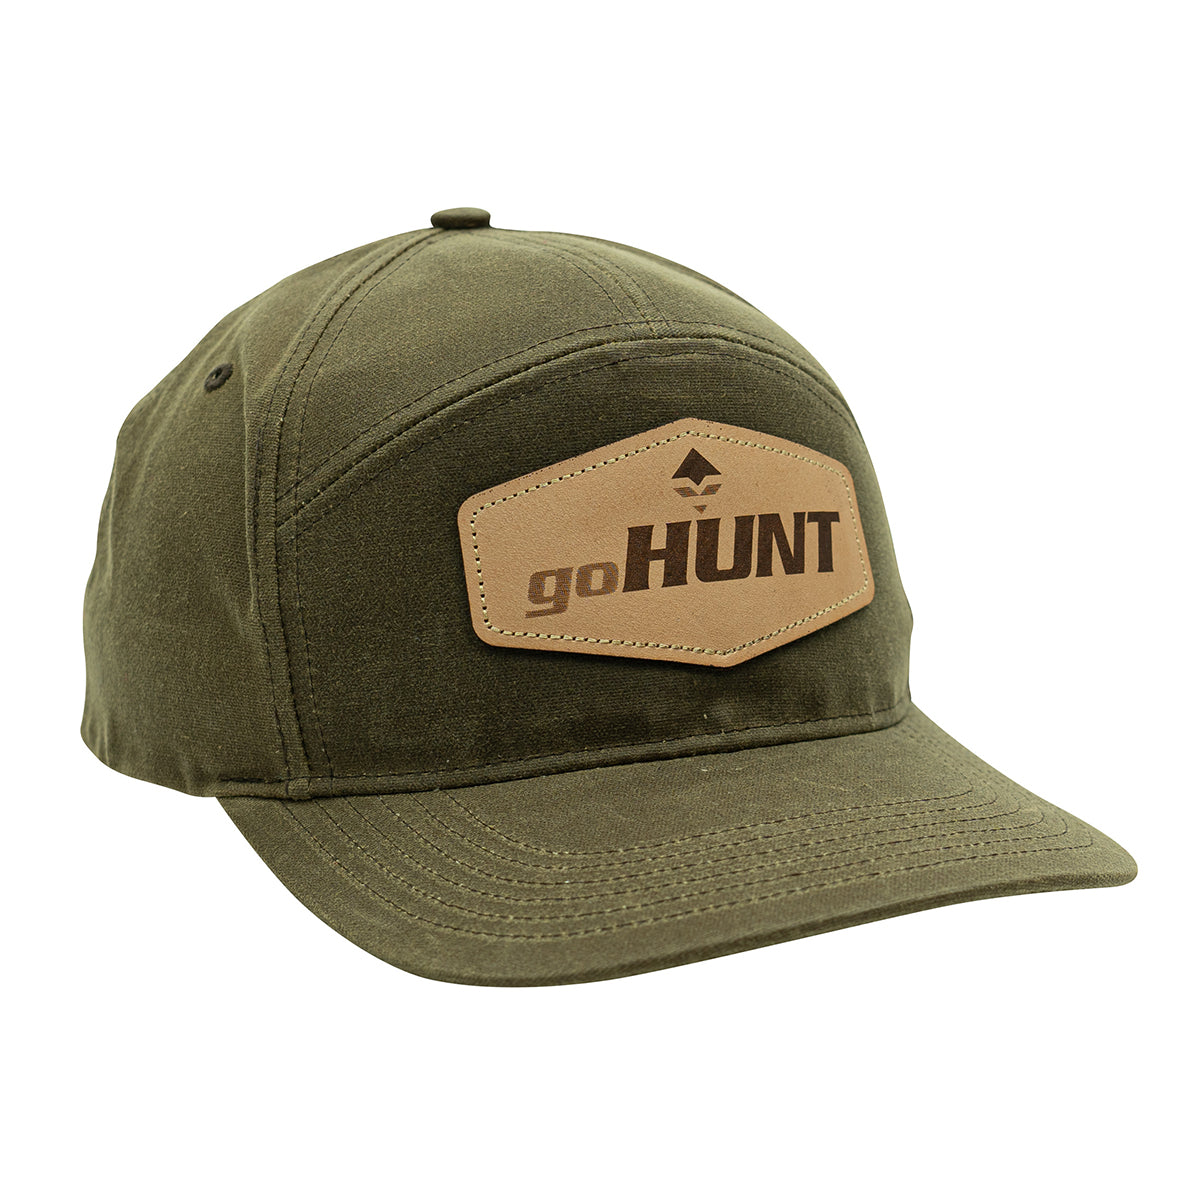 Leather Pioneer in Leather Pioneer by goHUNT | Apparel - goHUNT Shop by GOHUNT | GOHUNT - GOHUNT Shop